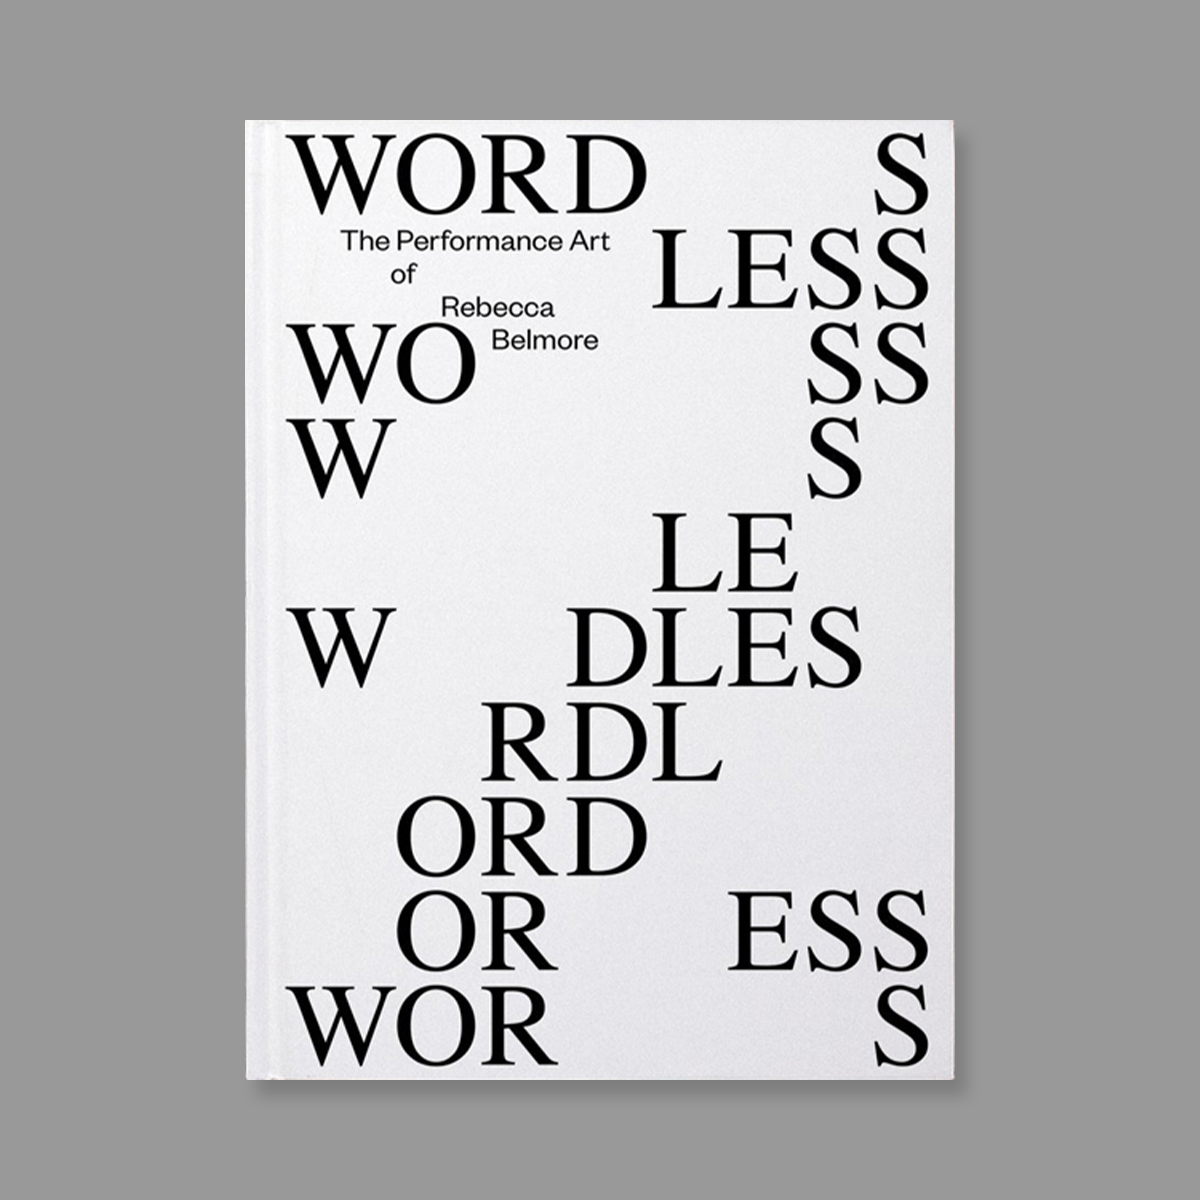 Front cover of Wordless: The Performance Art of Rebecca Belmore